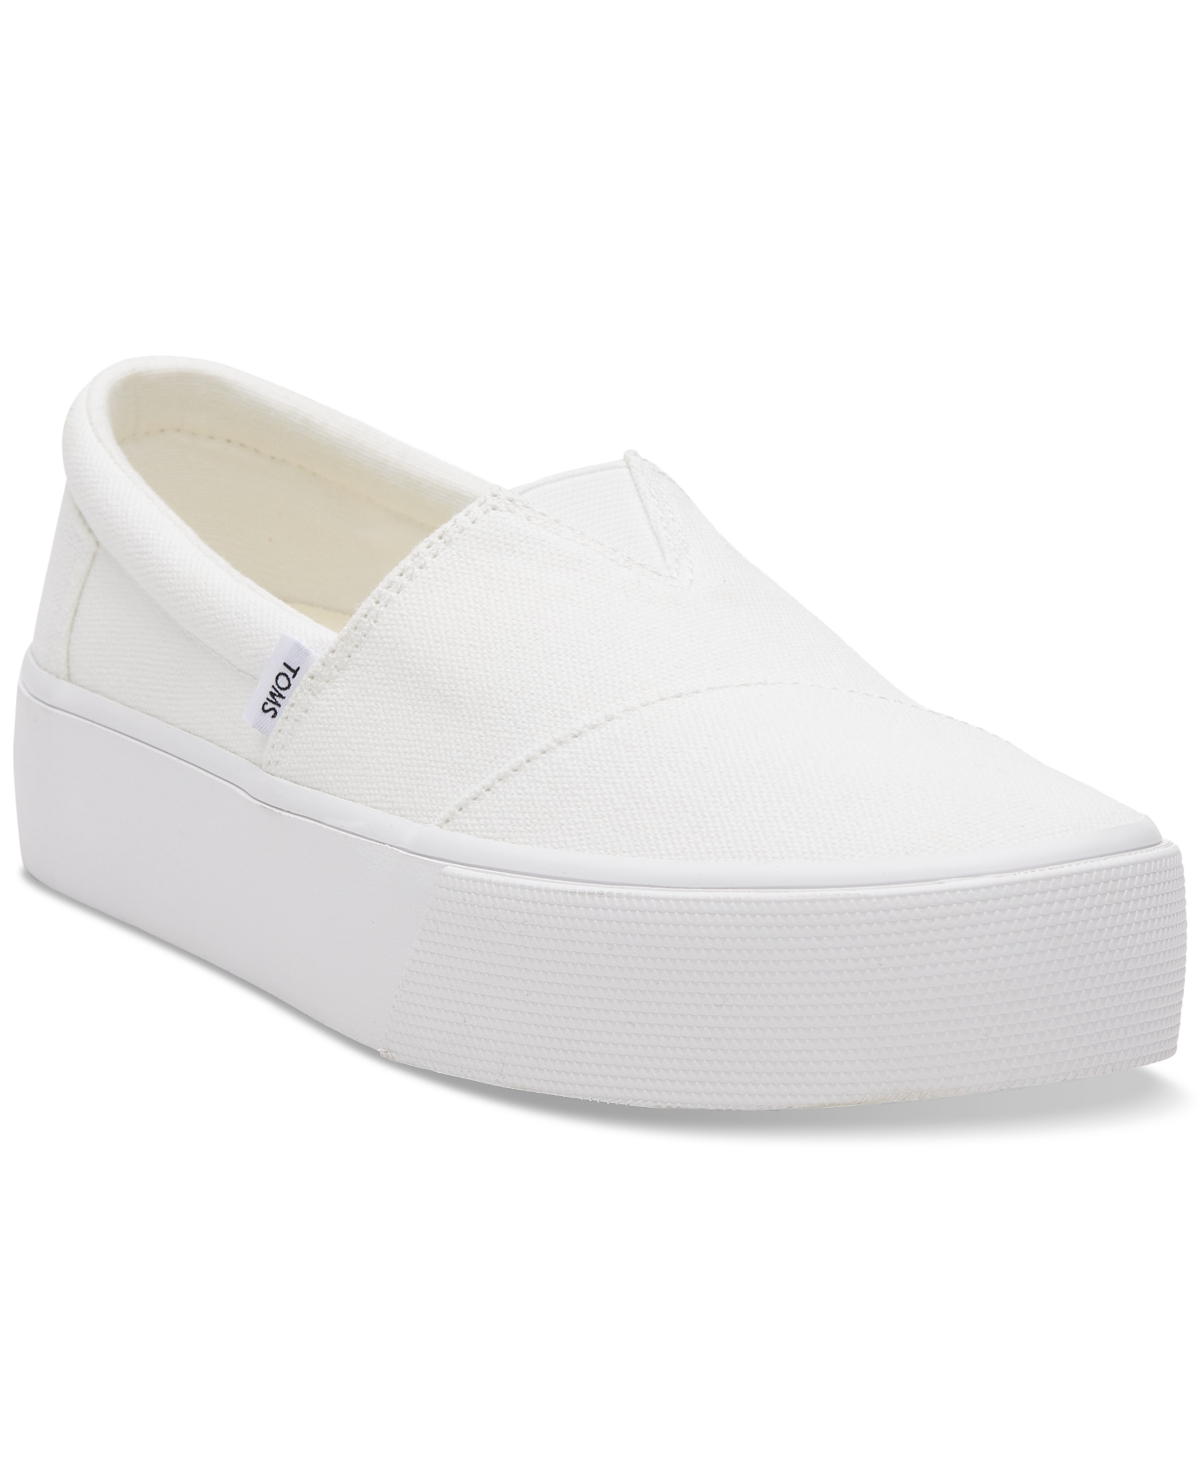 Shop Toms Women's Fenix Canvas Slip On Platform Sneakers In White Washed Canvas